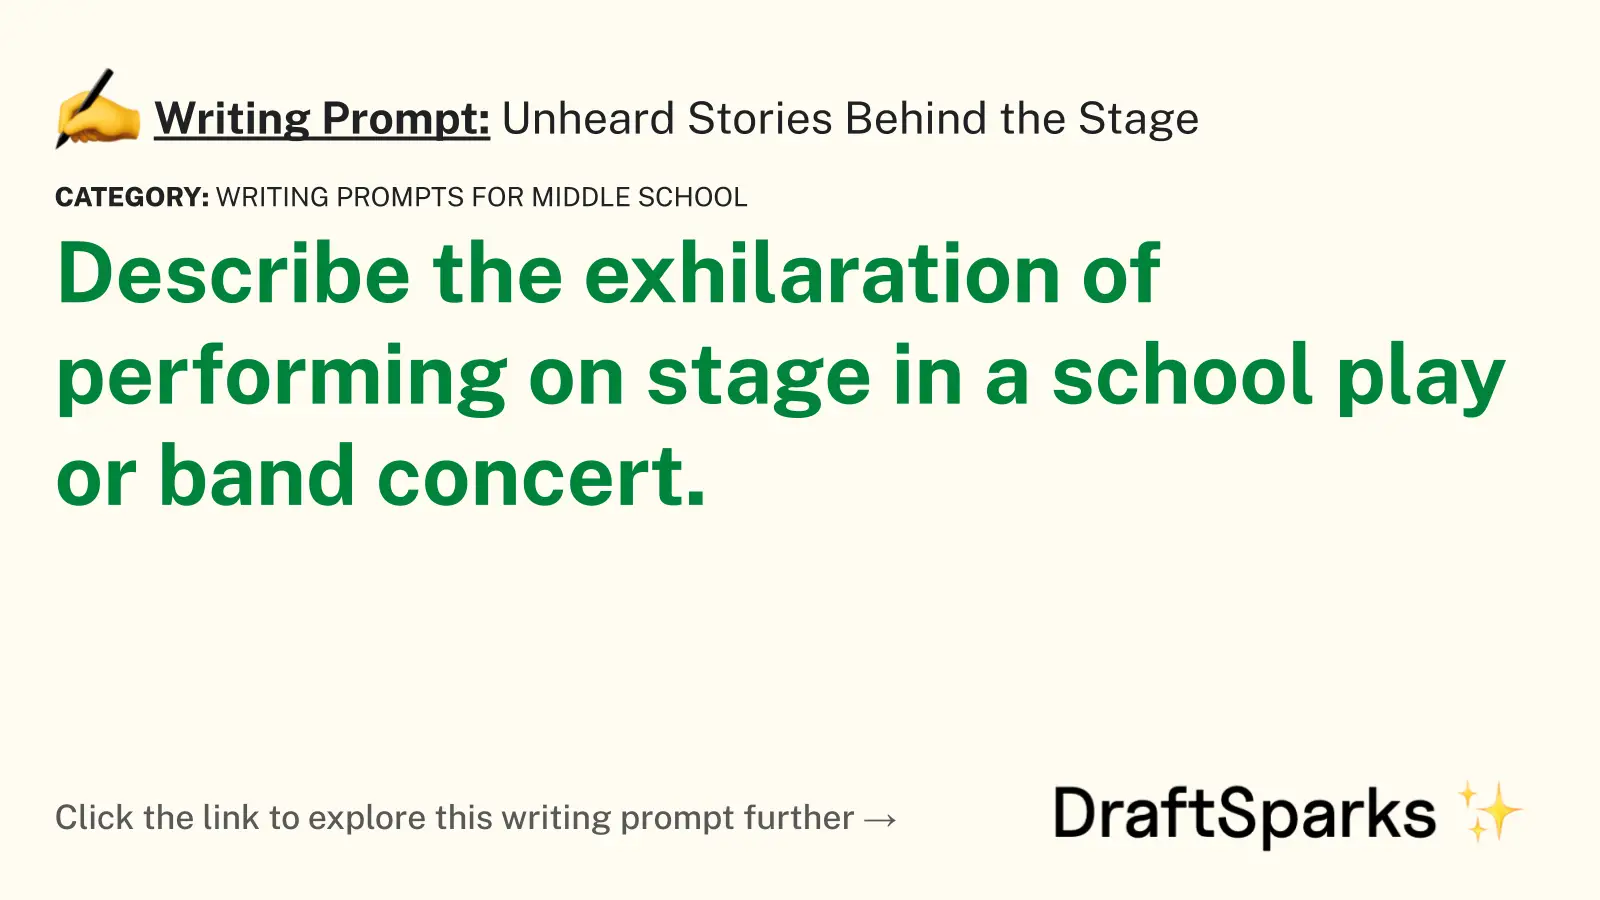 Unheard Stories Behind the Stage